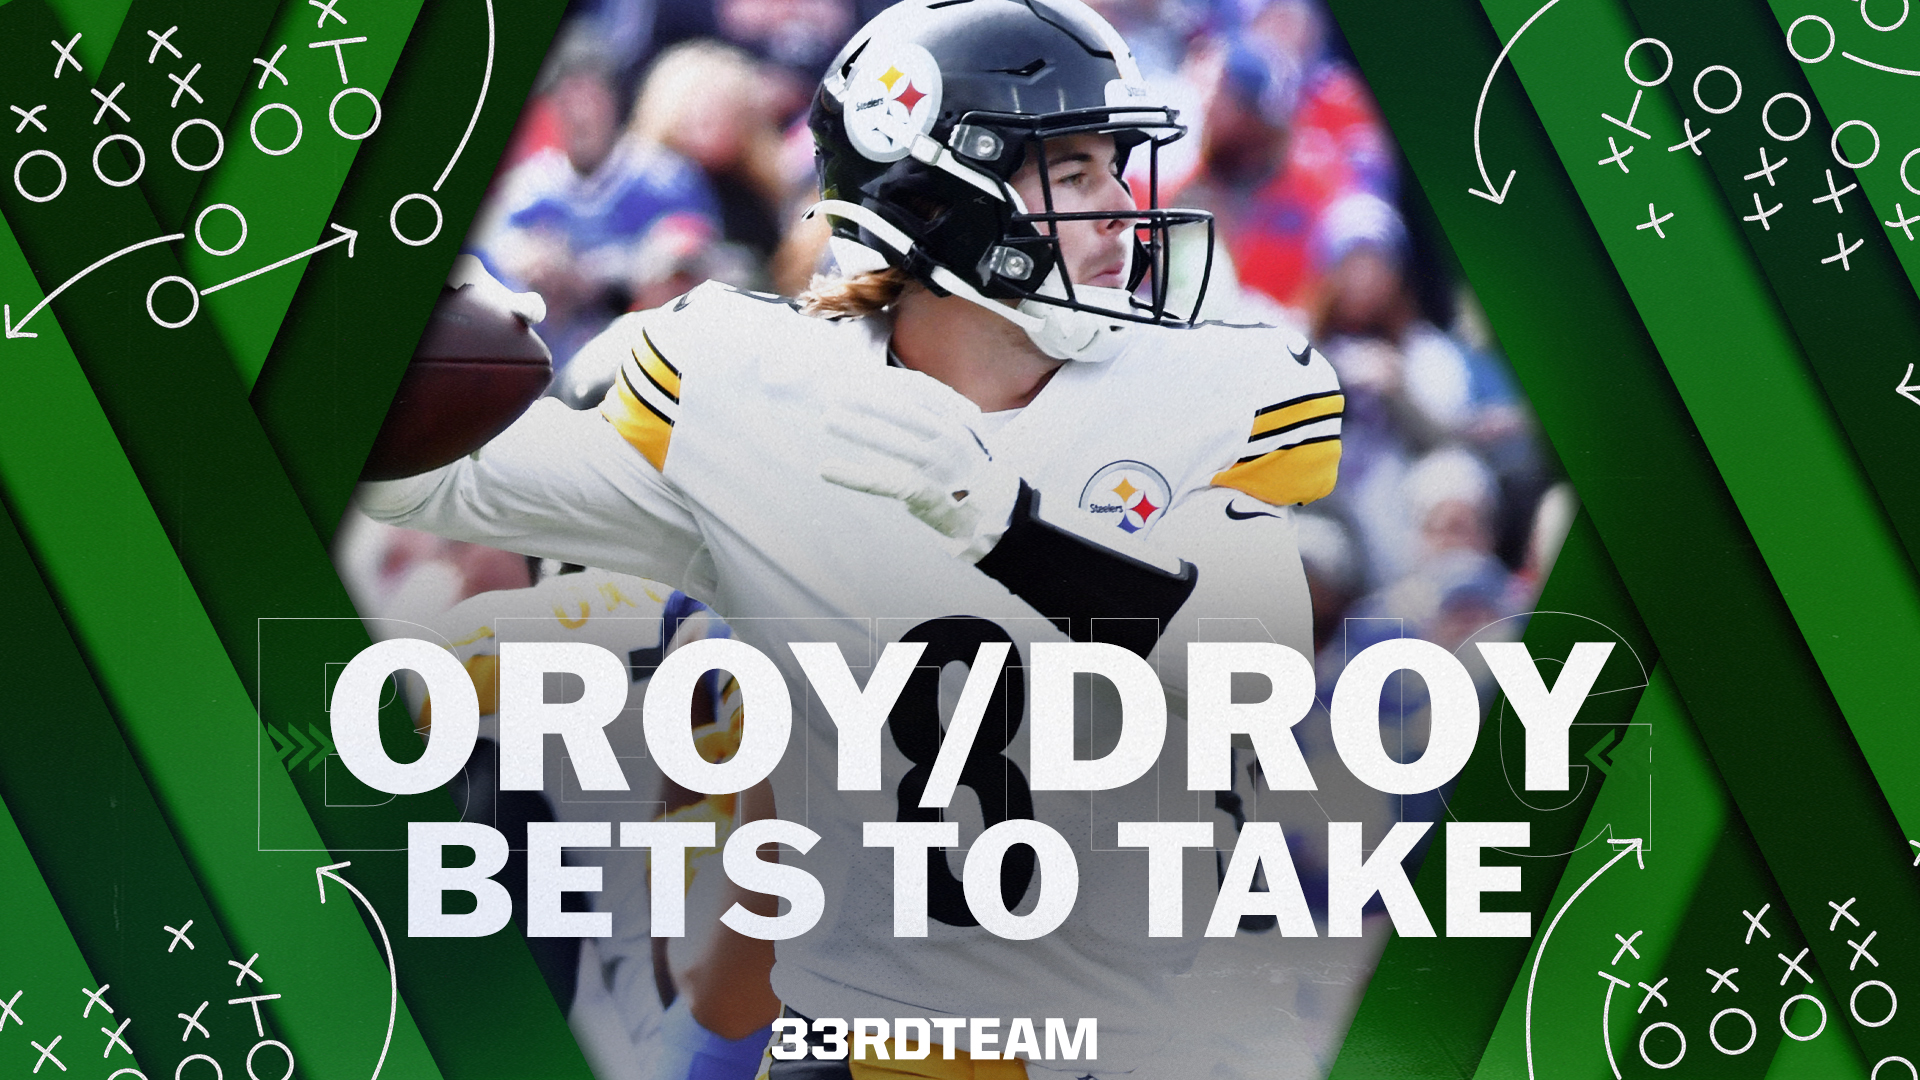 OROY/DROY Bets to Take